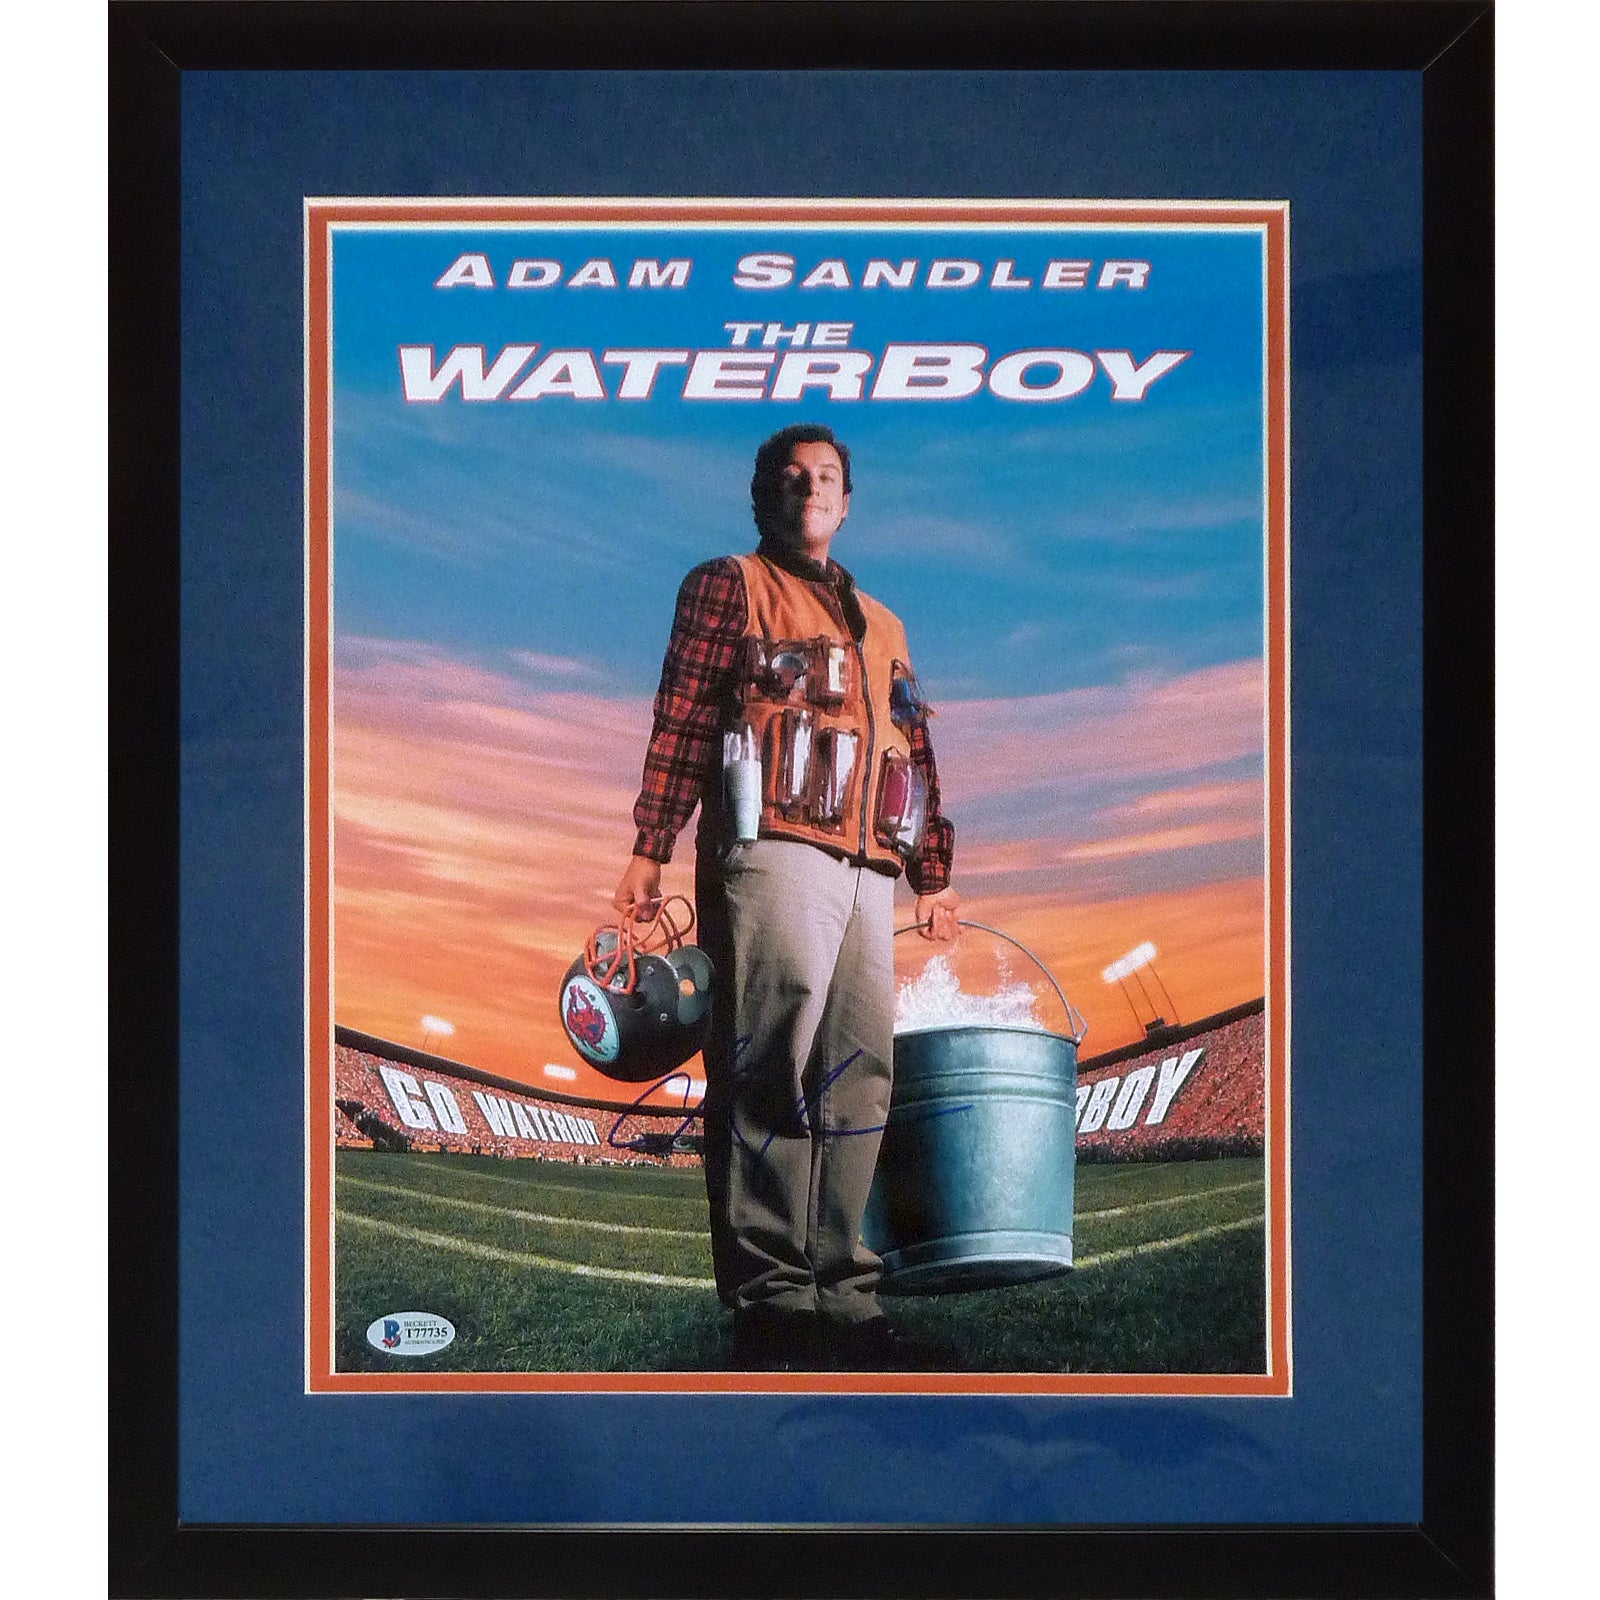 Adam Sandler Autographed The Waterboy 11x14 Deluxe Framed Movie Poster - JSA